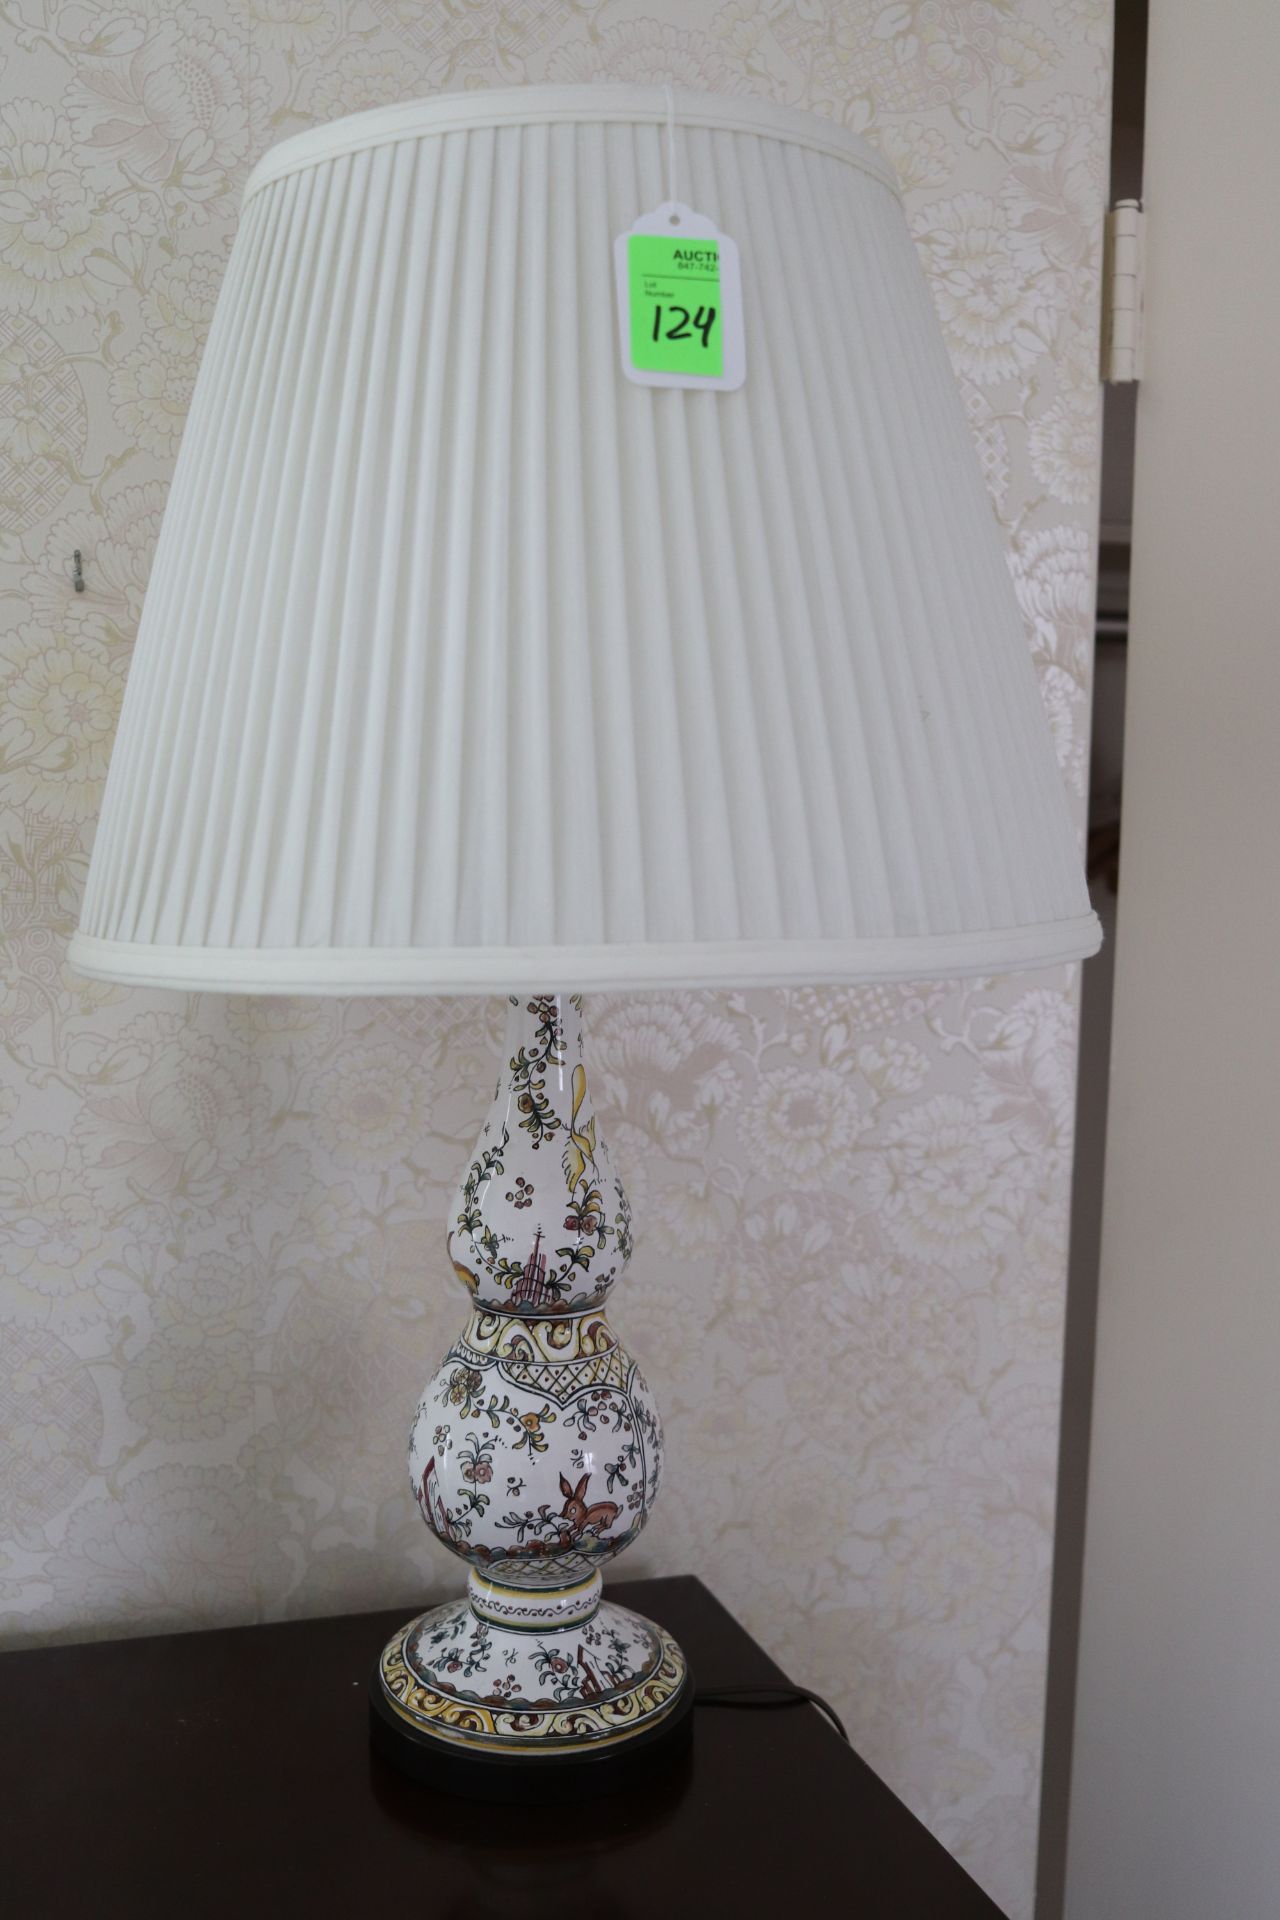 Porcelain table lamp, height 26"